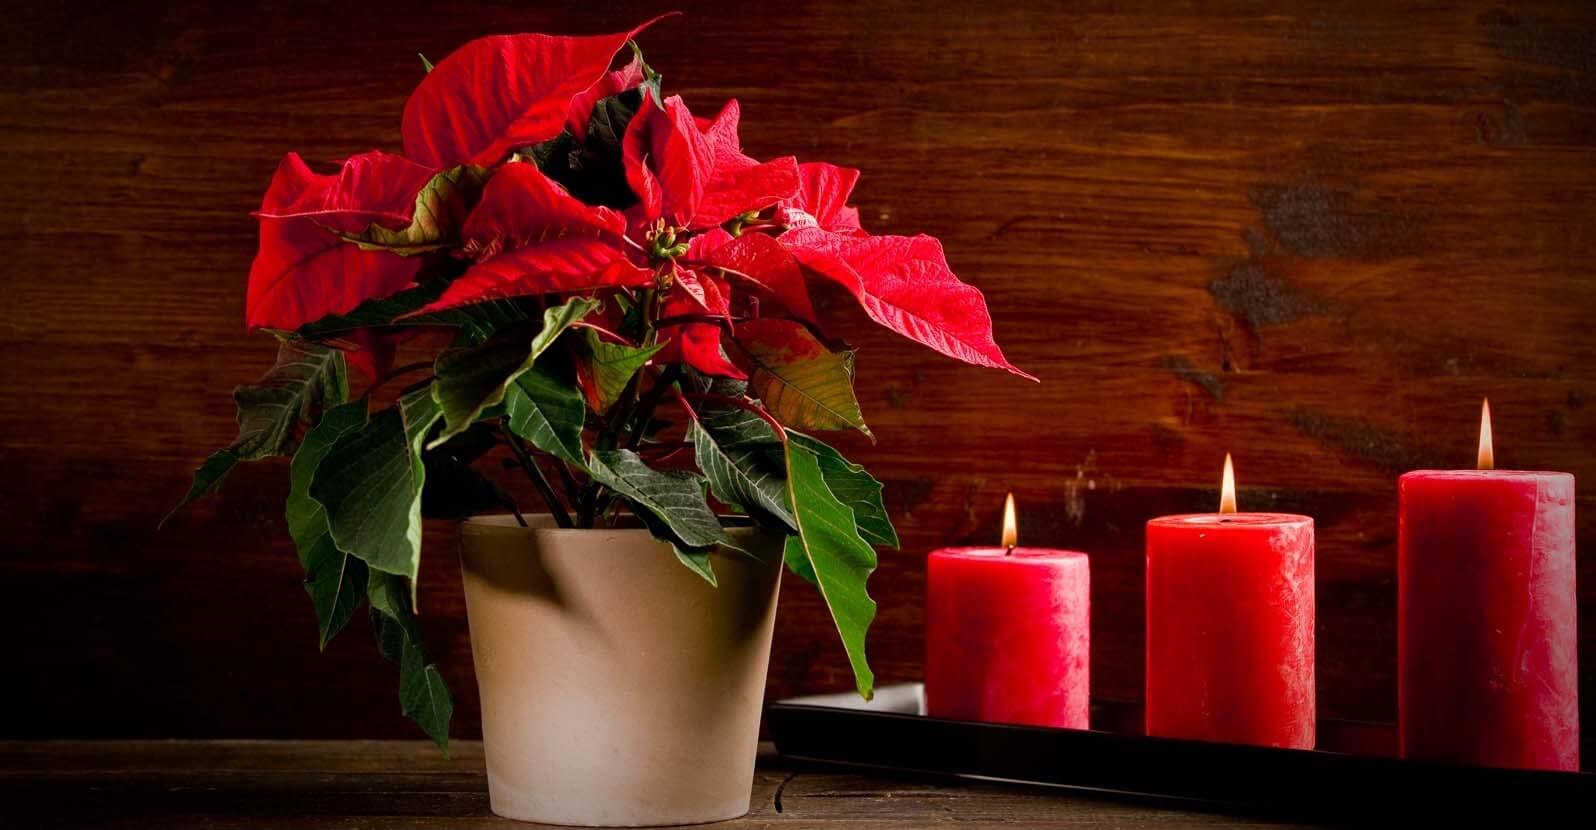 Growing Christmas Poinsettias: Saving and Caring For Your Holiday Gift Container Plants